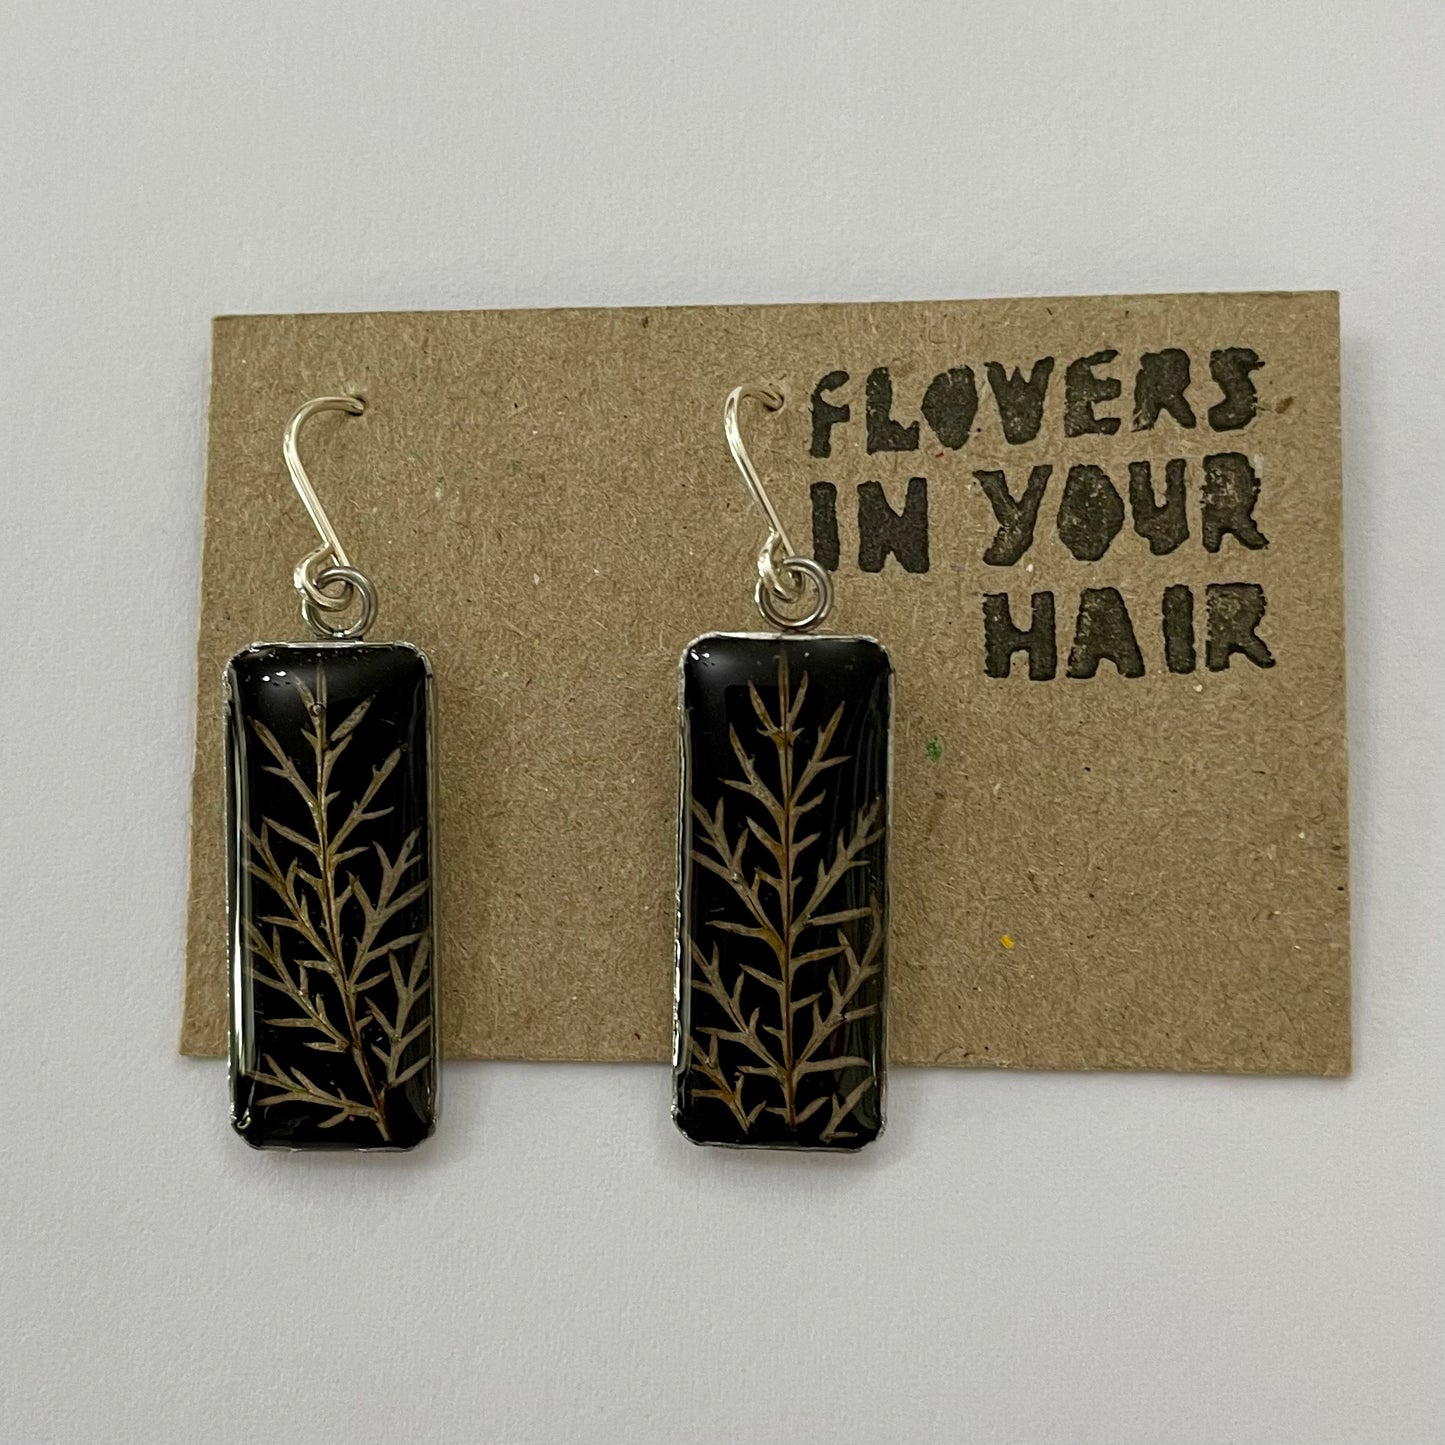 Flowers In Your Hair Large Rectangle Drop Earrings - Leaf On Black